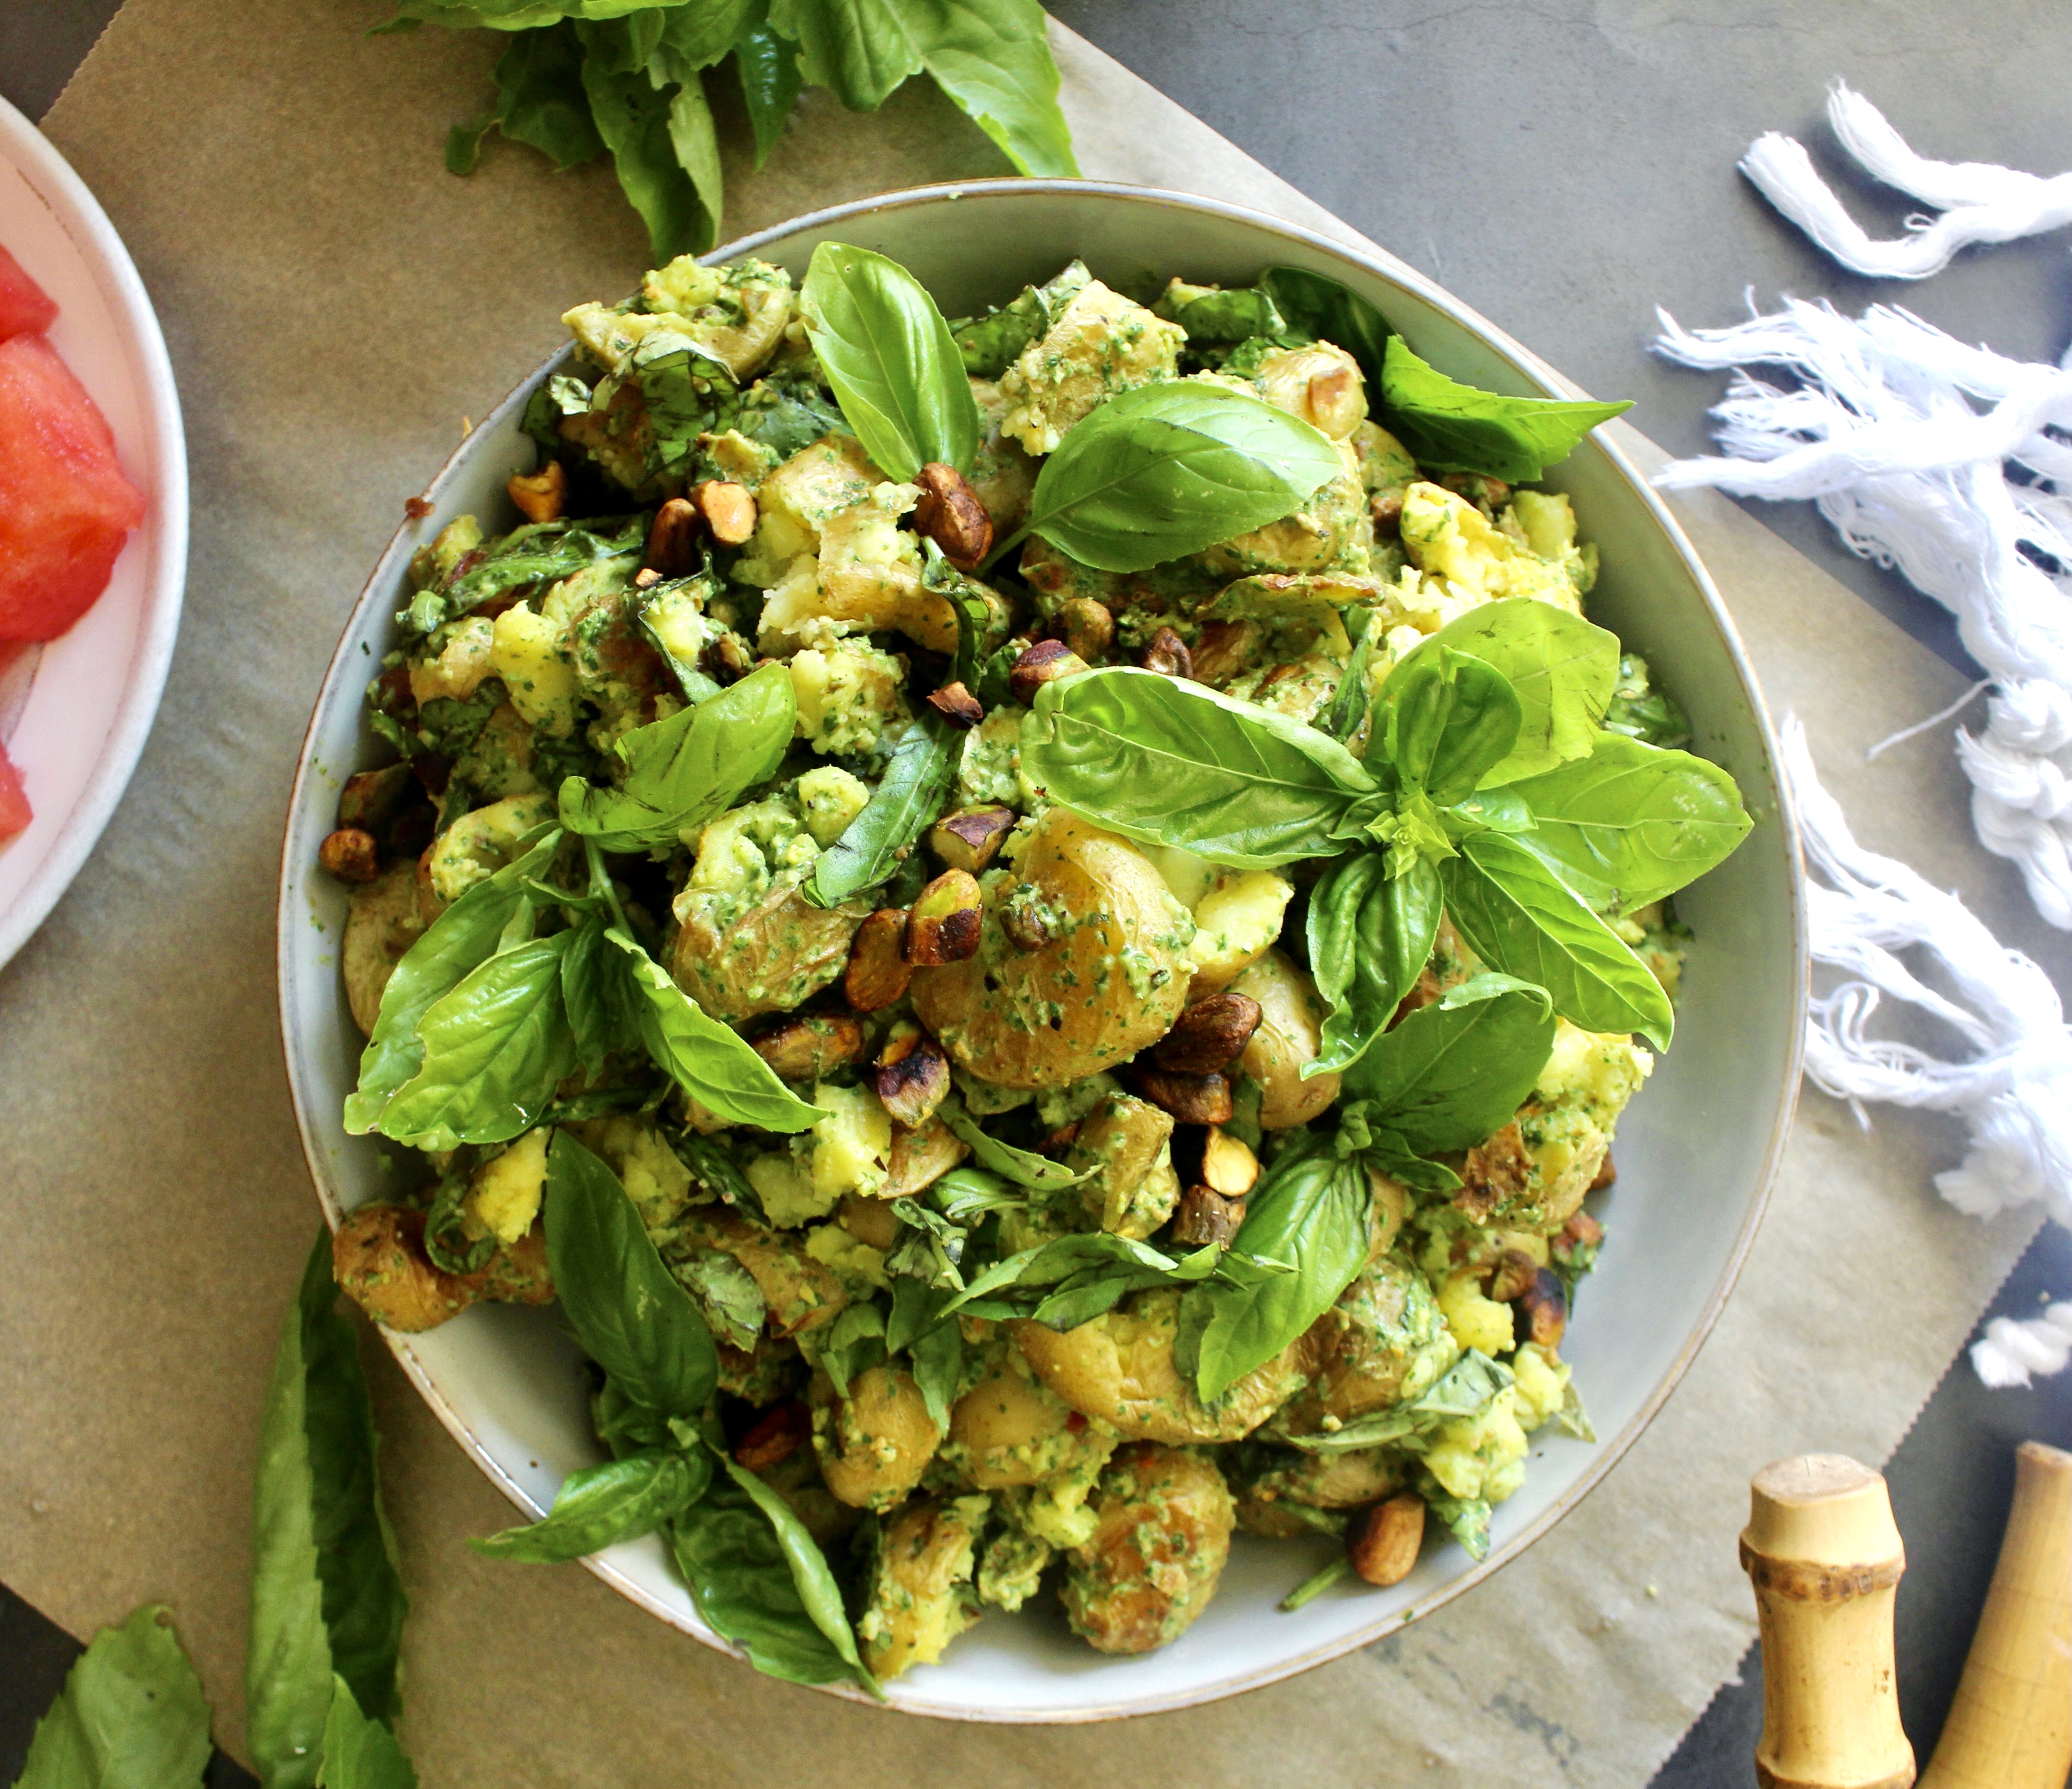 Crispy smashed baby potatoes tossed in a simple arugula pesto: This Smashed Pistachio Pesto di Rucola Potato Salad is the best summer mayo-free potato salad!